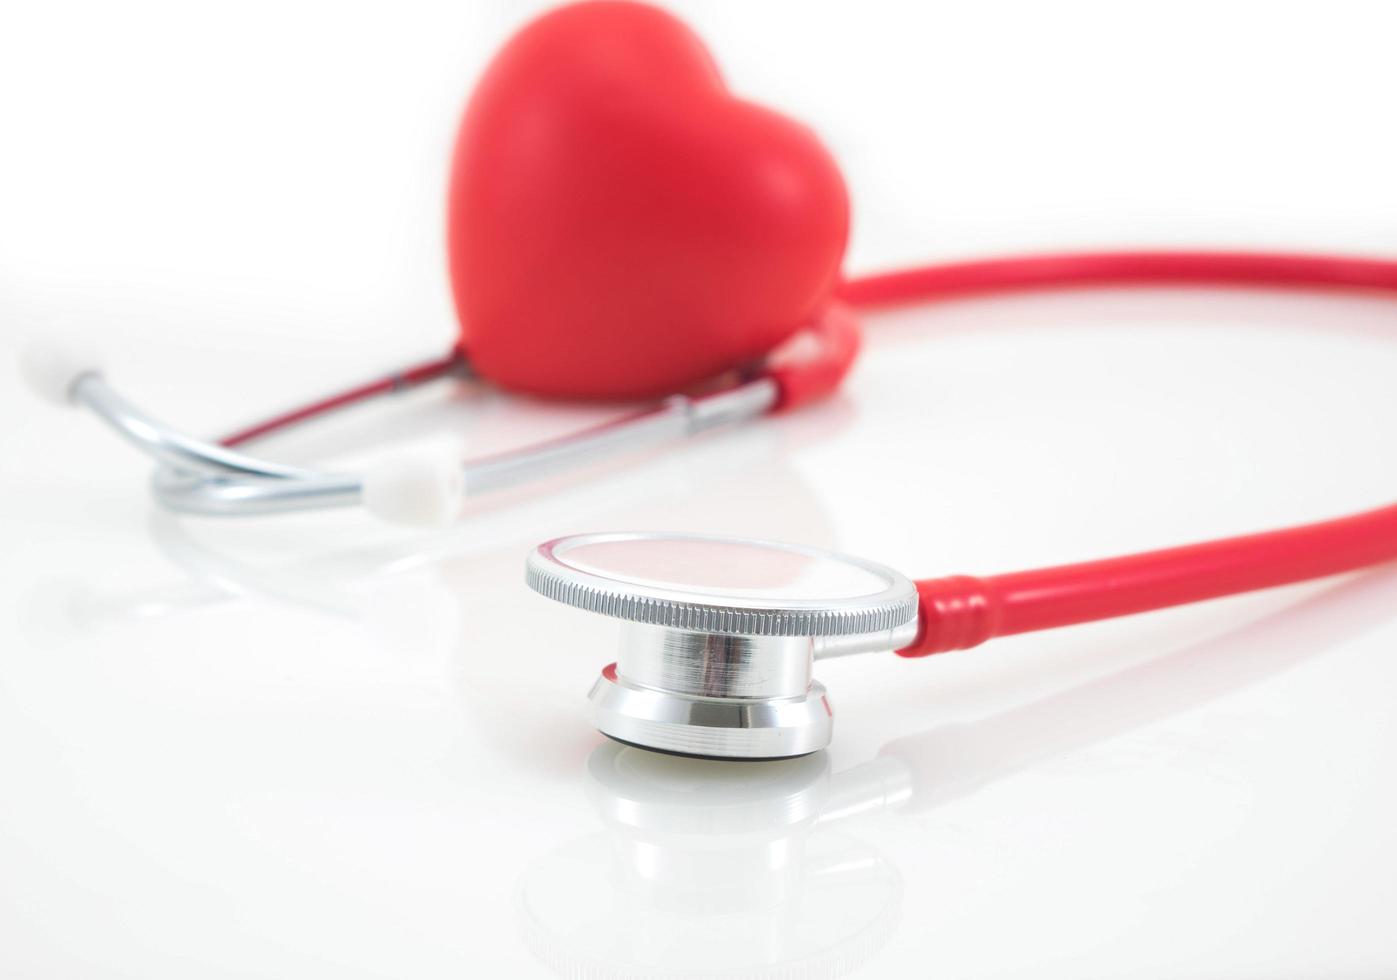 Stethoscope and red heart on white background photo